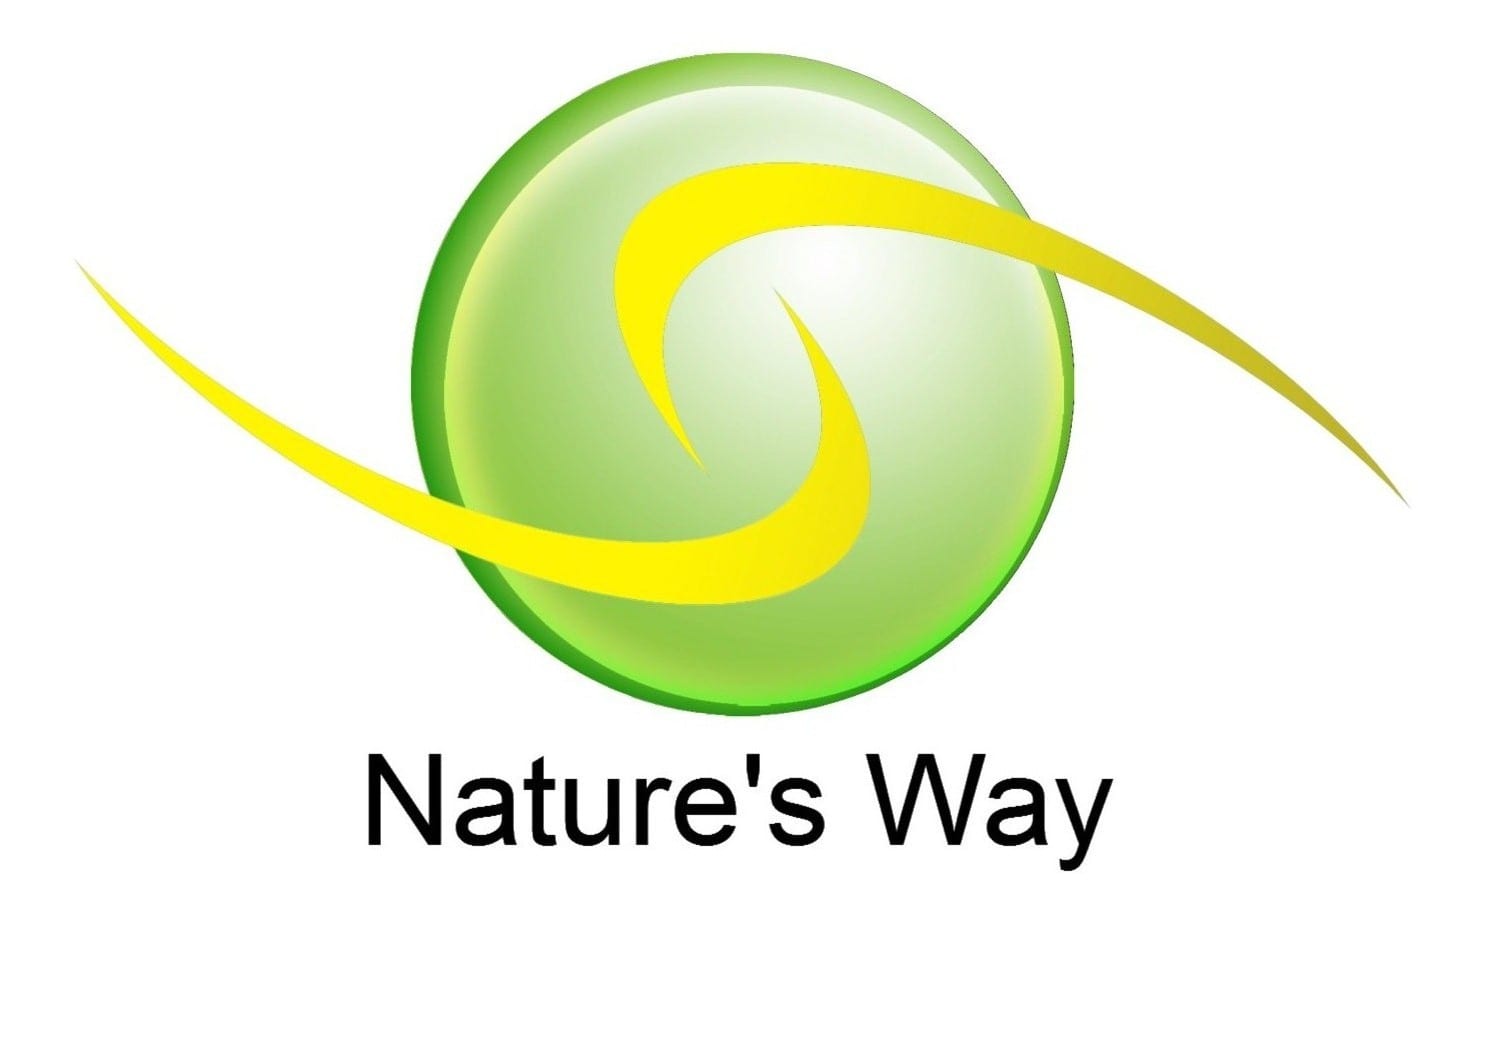 Using “Nature’s” Way to Remove Odors from Smoking and Pets